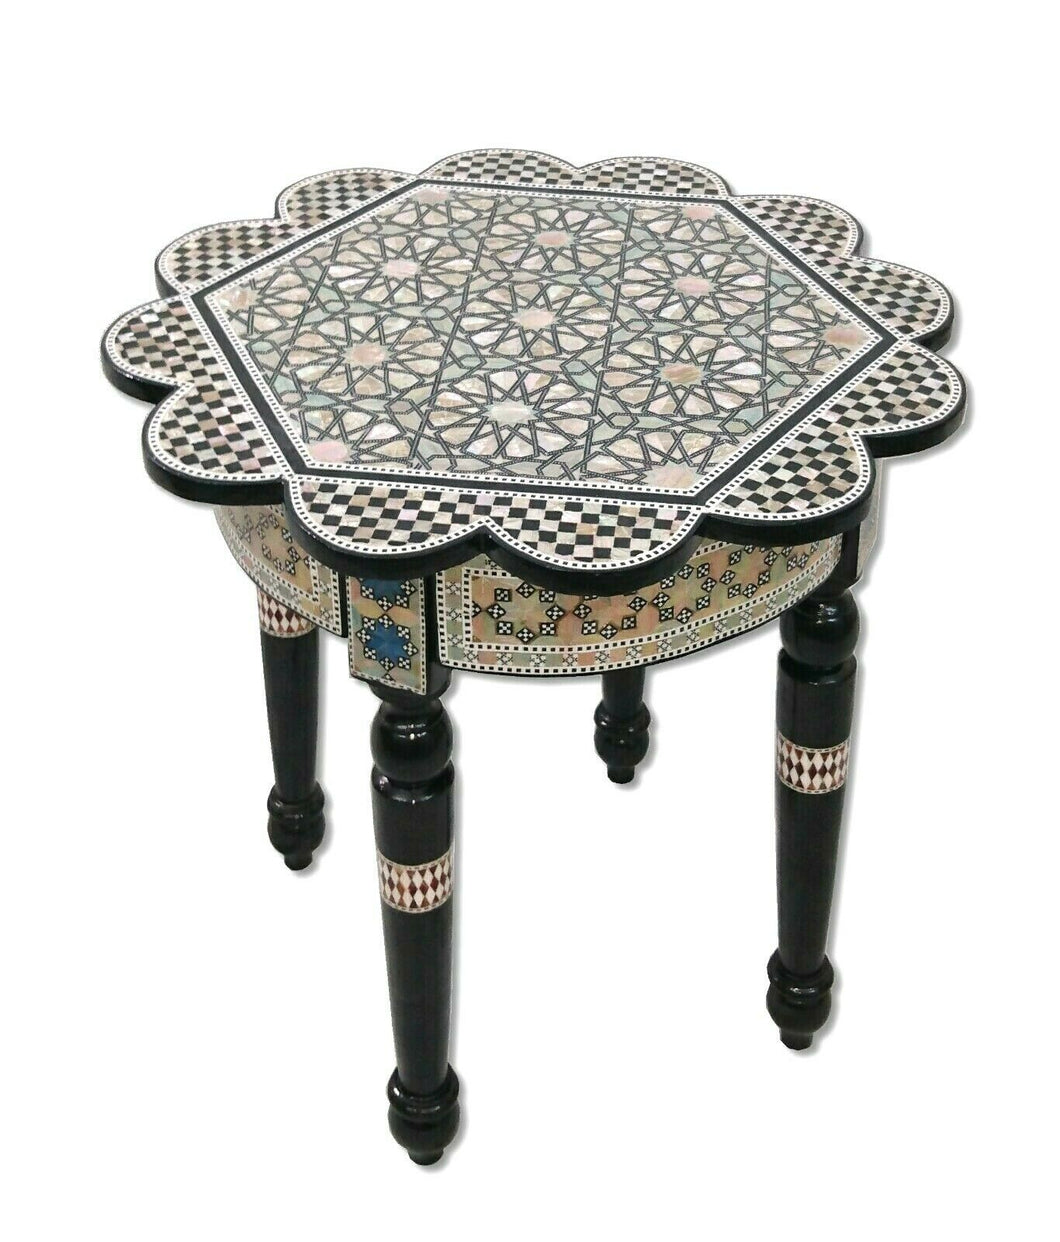 W165 Handmade Mother of Pearl Inlaid Art Egyptian Round/Rose End Side Table